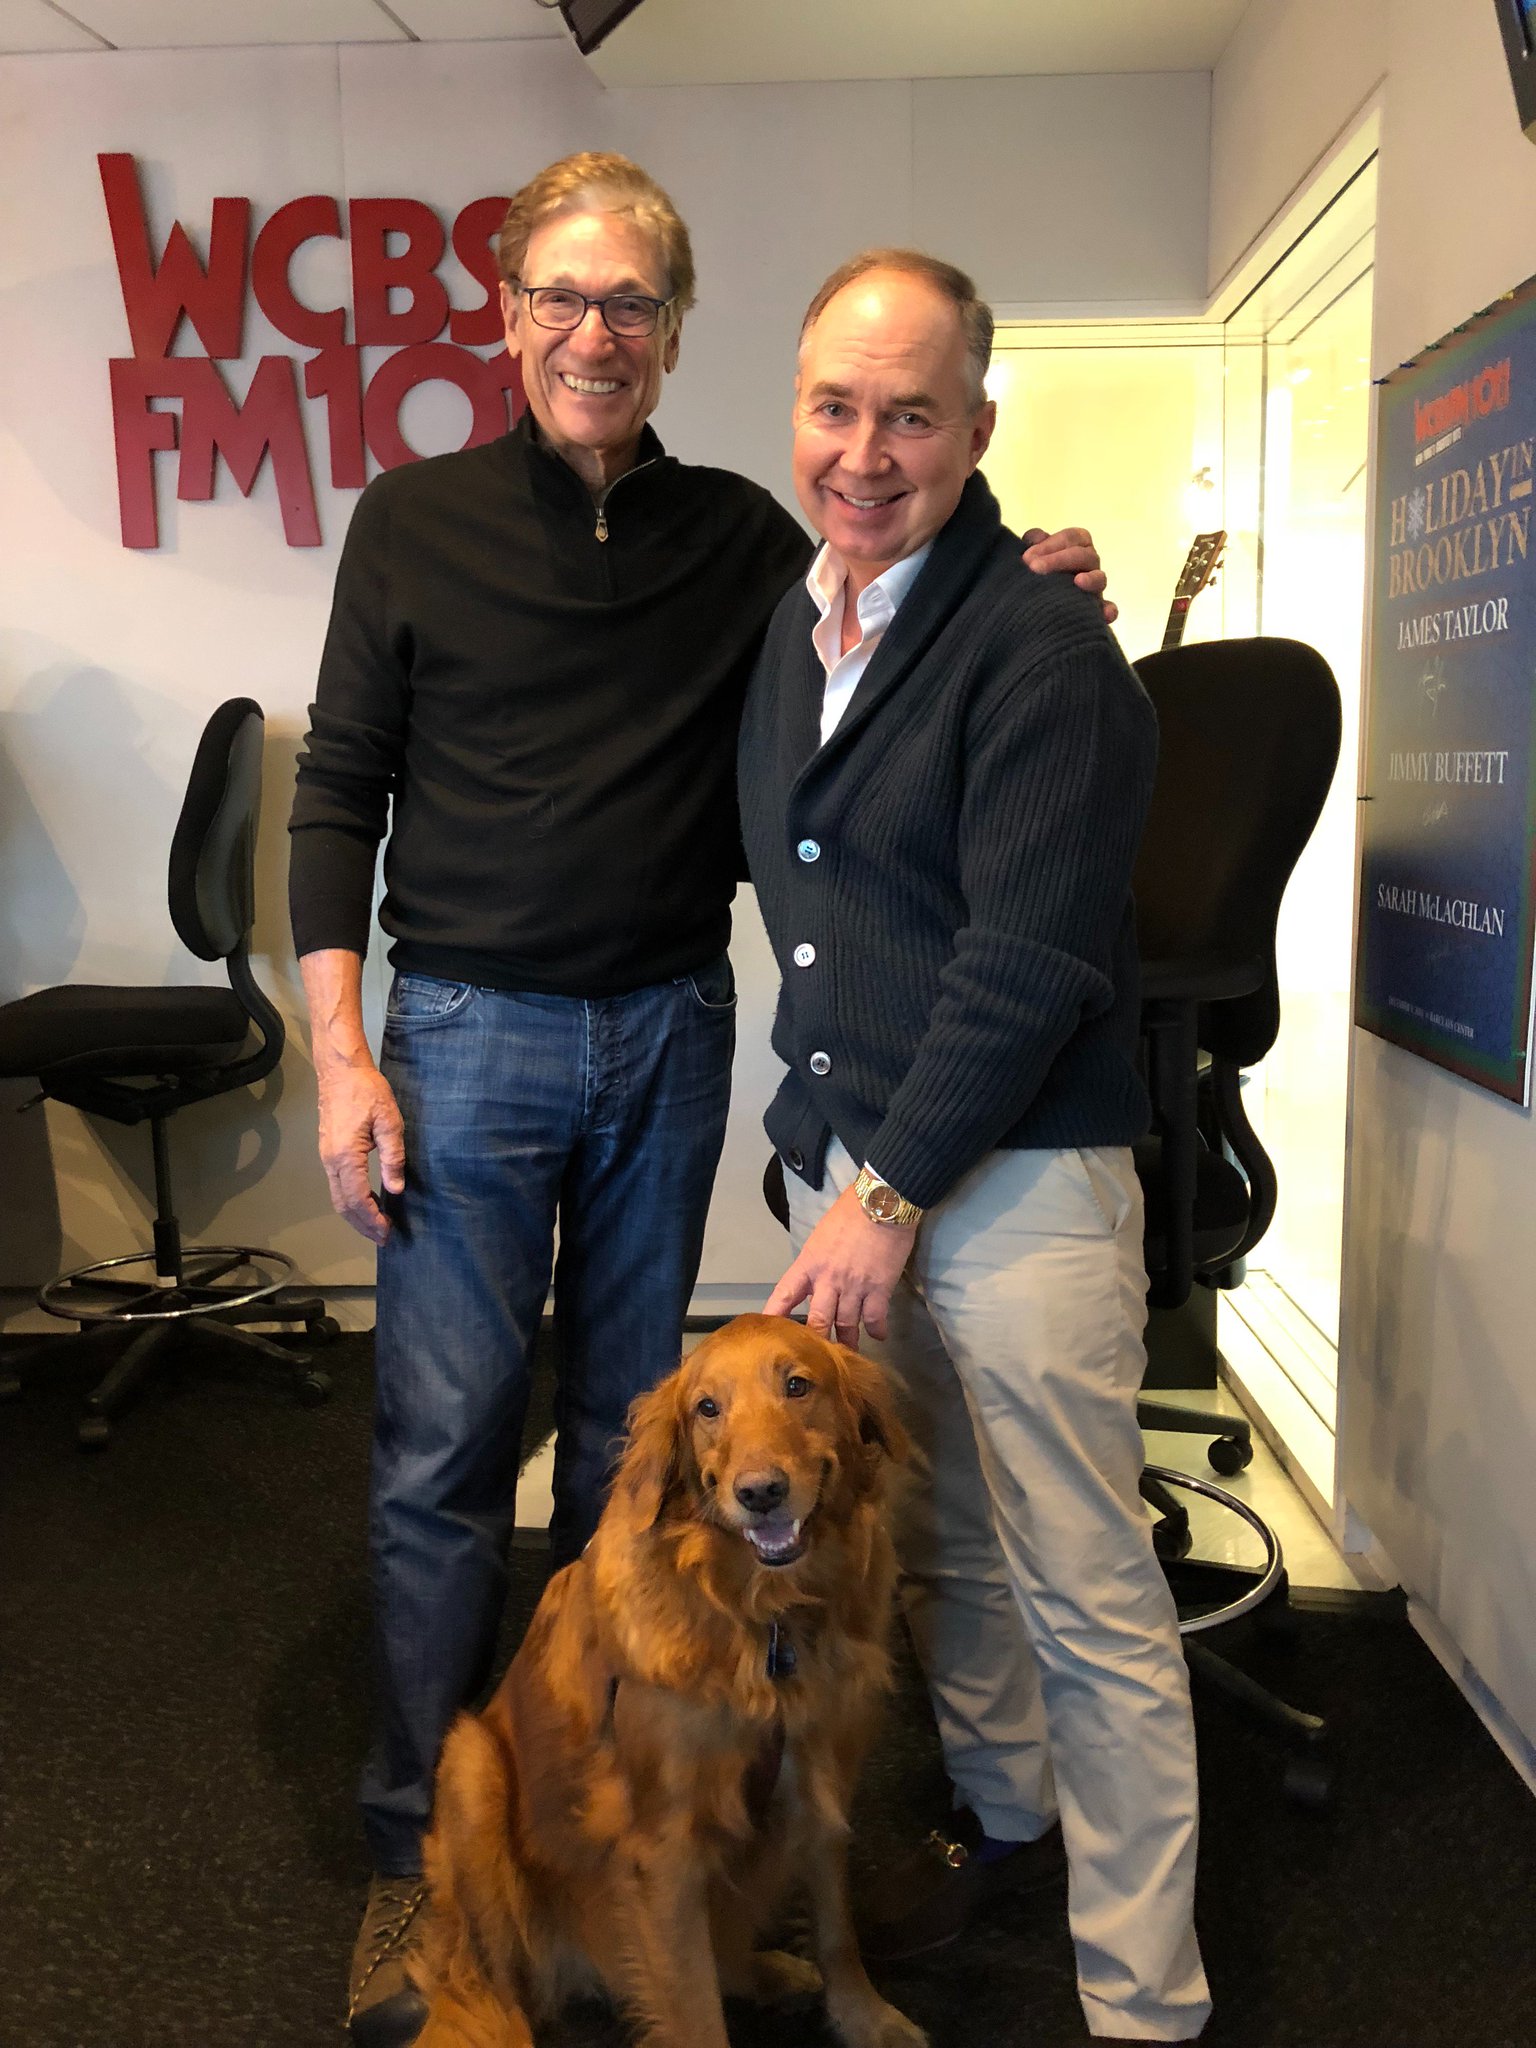 Happy B\day to TV celeb Maury Povich! Hanging here with his great dog Birdie!   